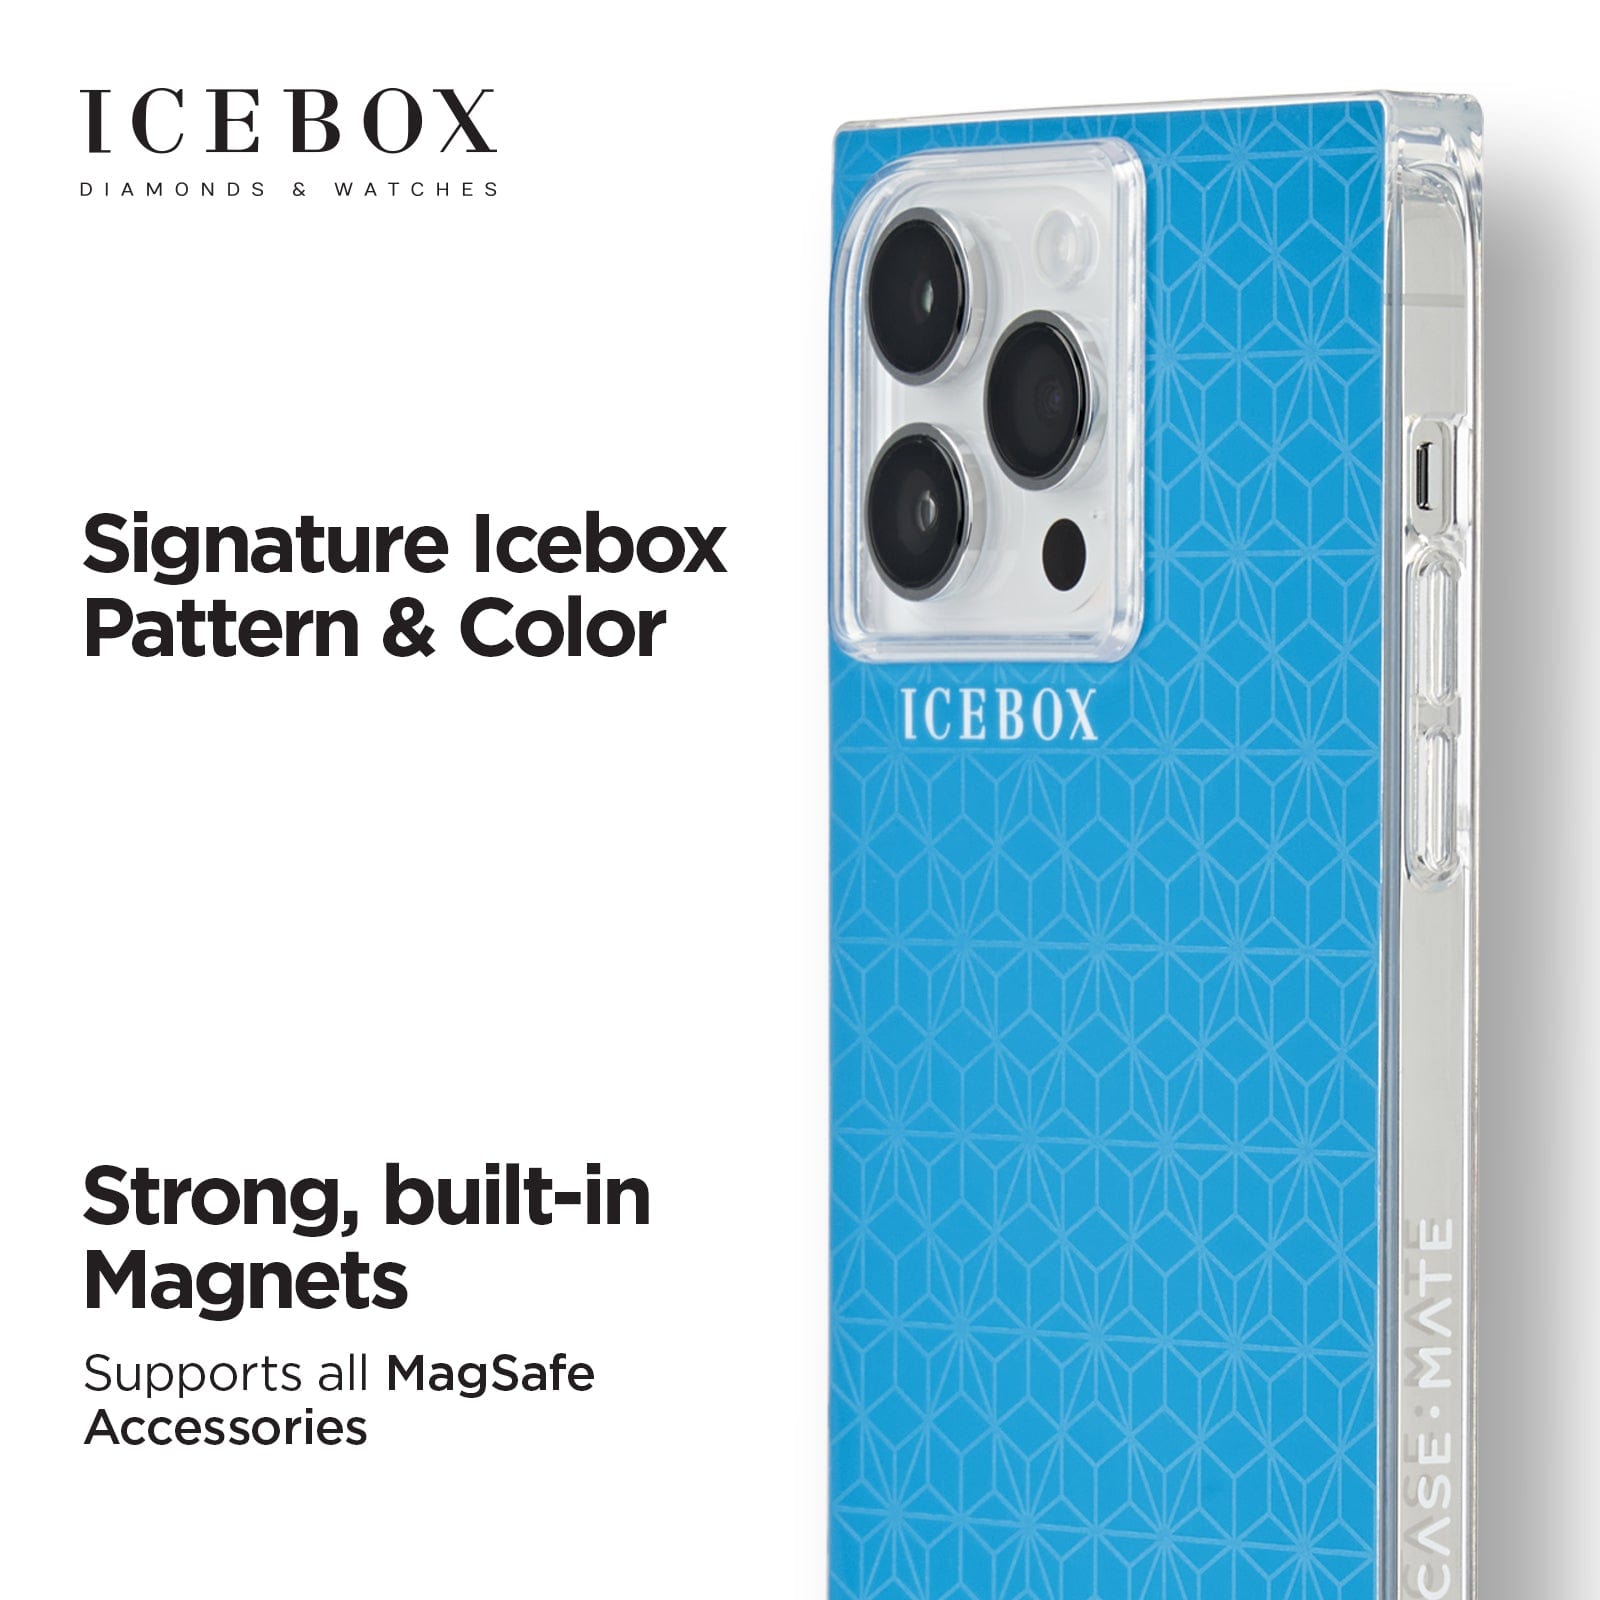 SIGNATURE ICEBOX PATTERN AND COLOR. STRONG, BUILT-IN MAGNETS SUPPORTS ALL MAGSAFE ACCESSORIES